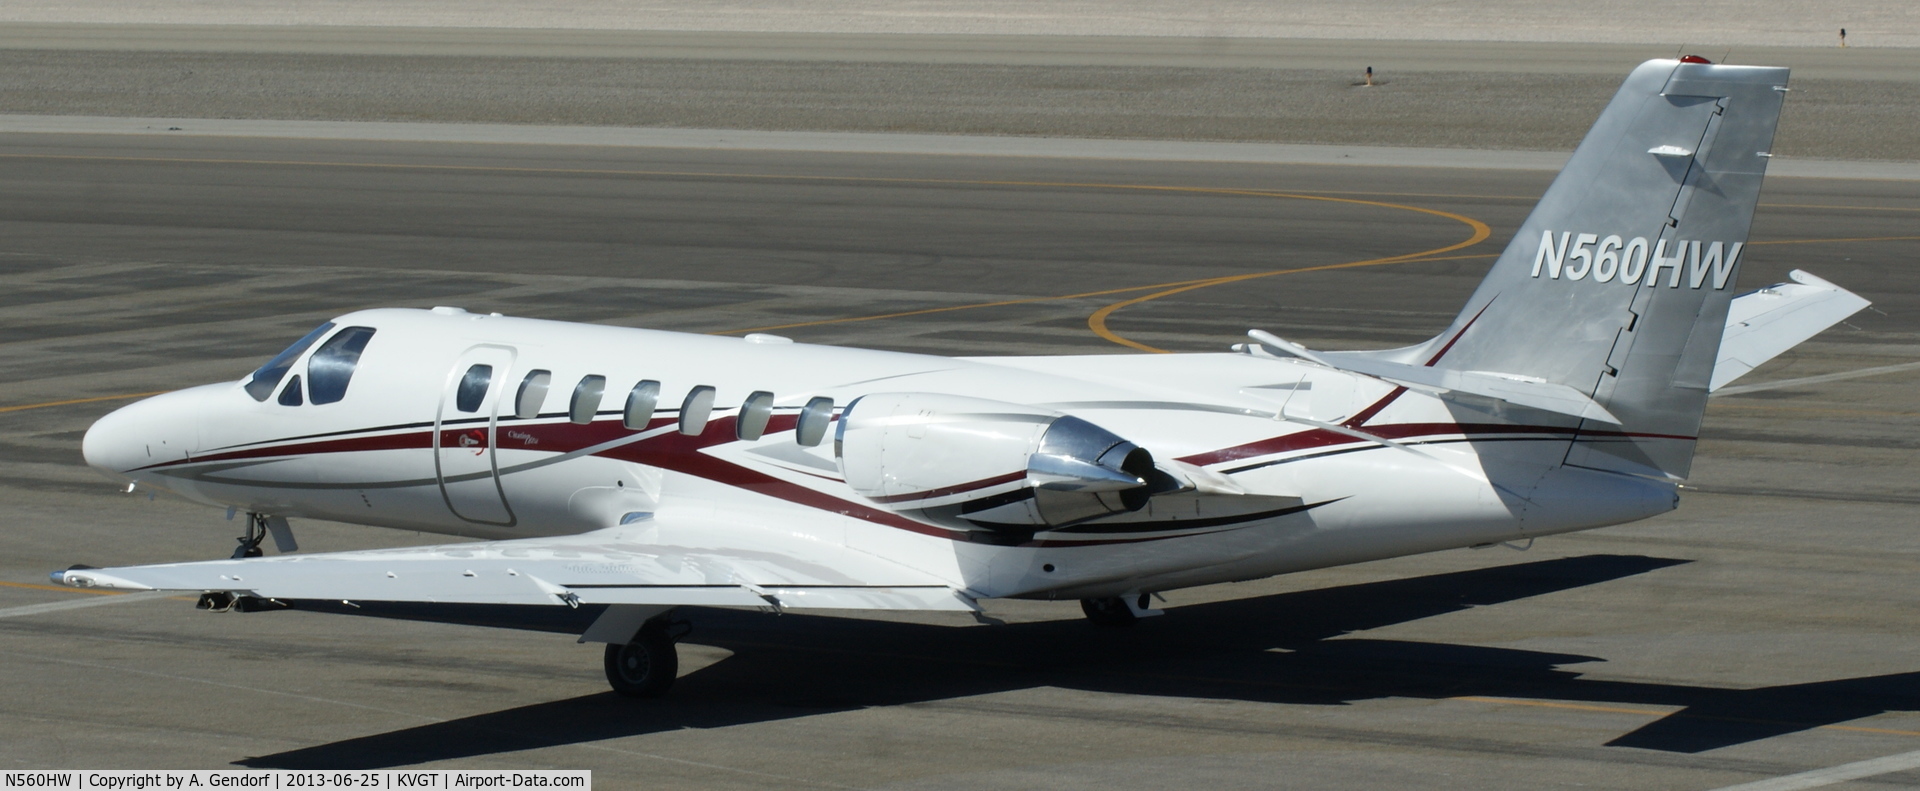 N560HW, 1994 Cessna 560 C/N 560-0281, Southern County Oil Co. (untitled), seen here parked on the apron at North Las Vegas(KVGT)